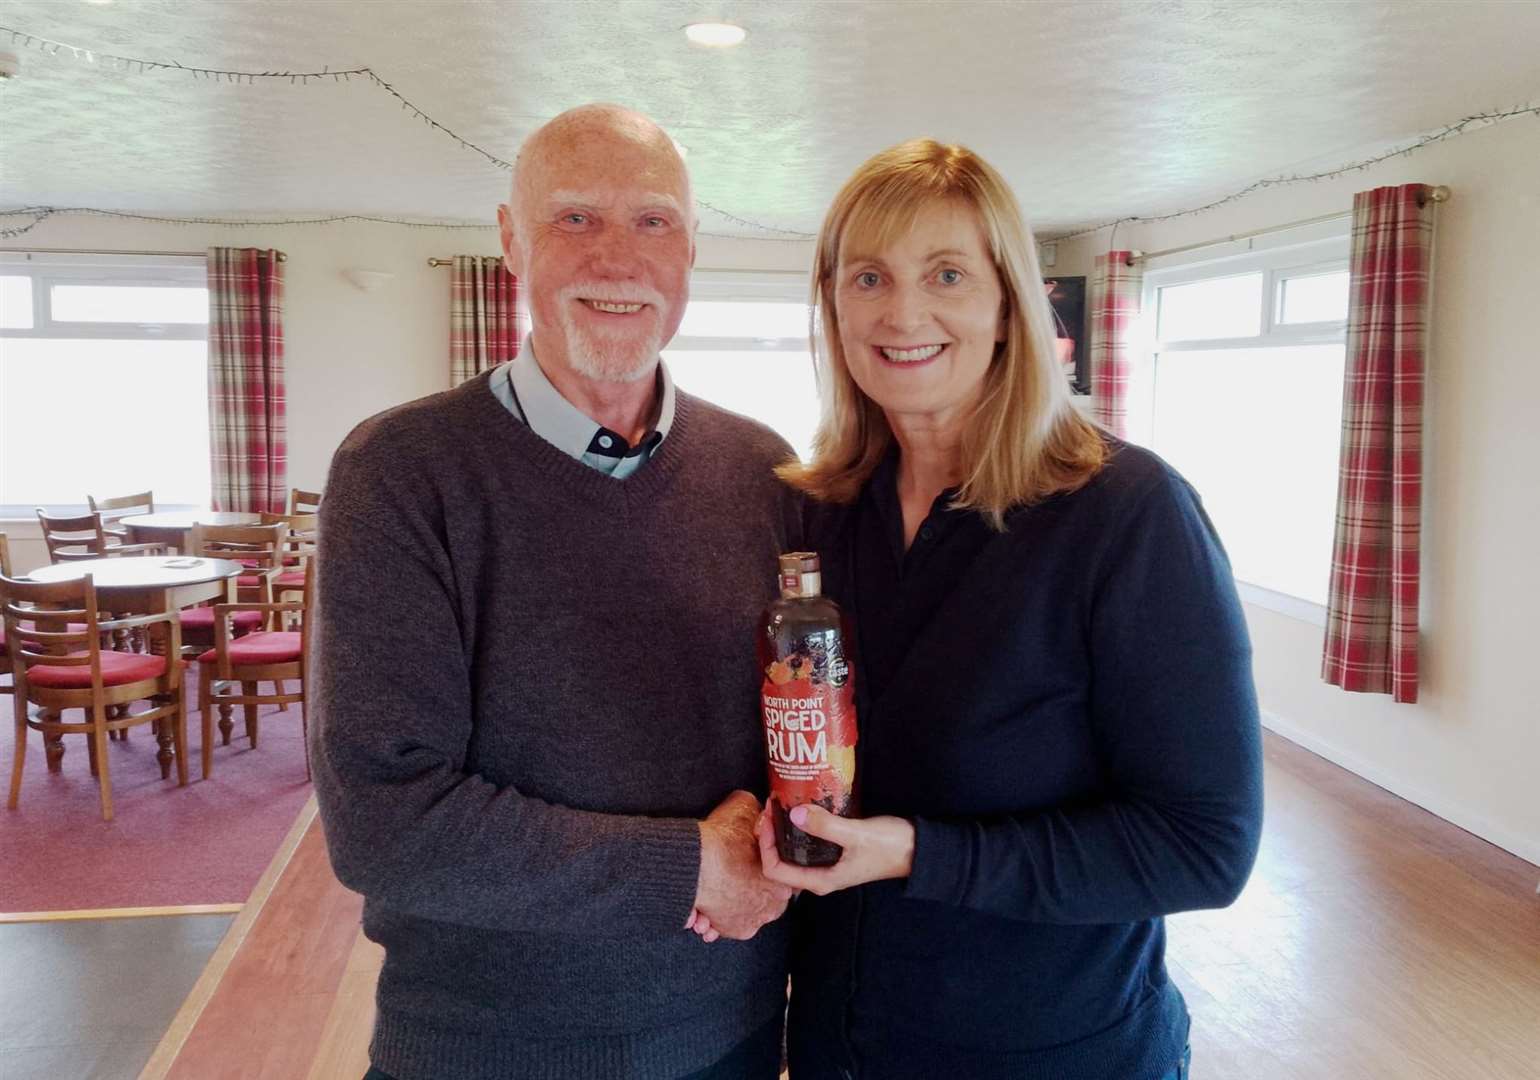 Pete Barker receives a bottle of North Point Distillery spiced rum from Carol Paterson after he won the nearest-the-pin prize in the latest round of the Senior Stableford competition.